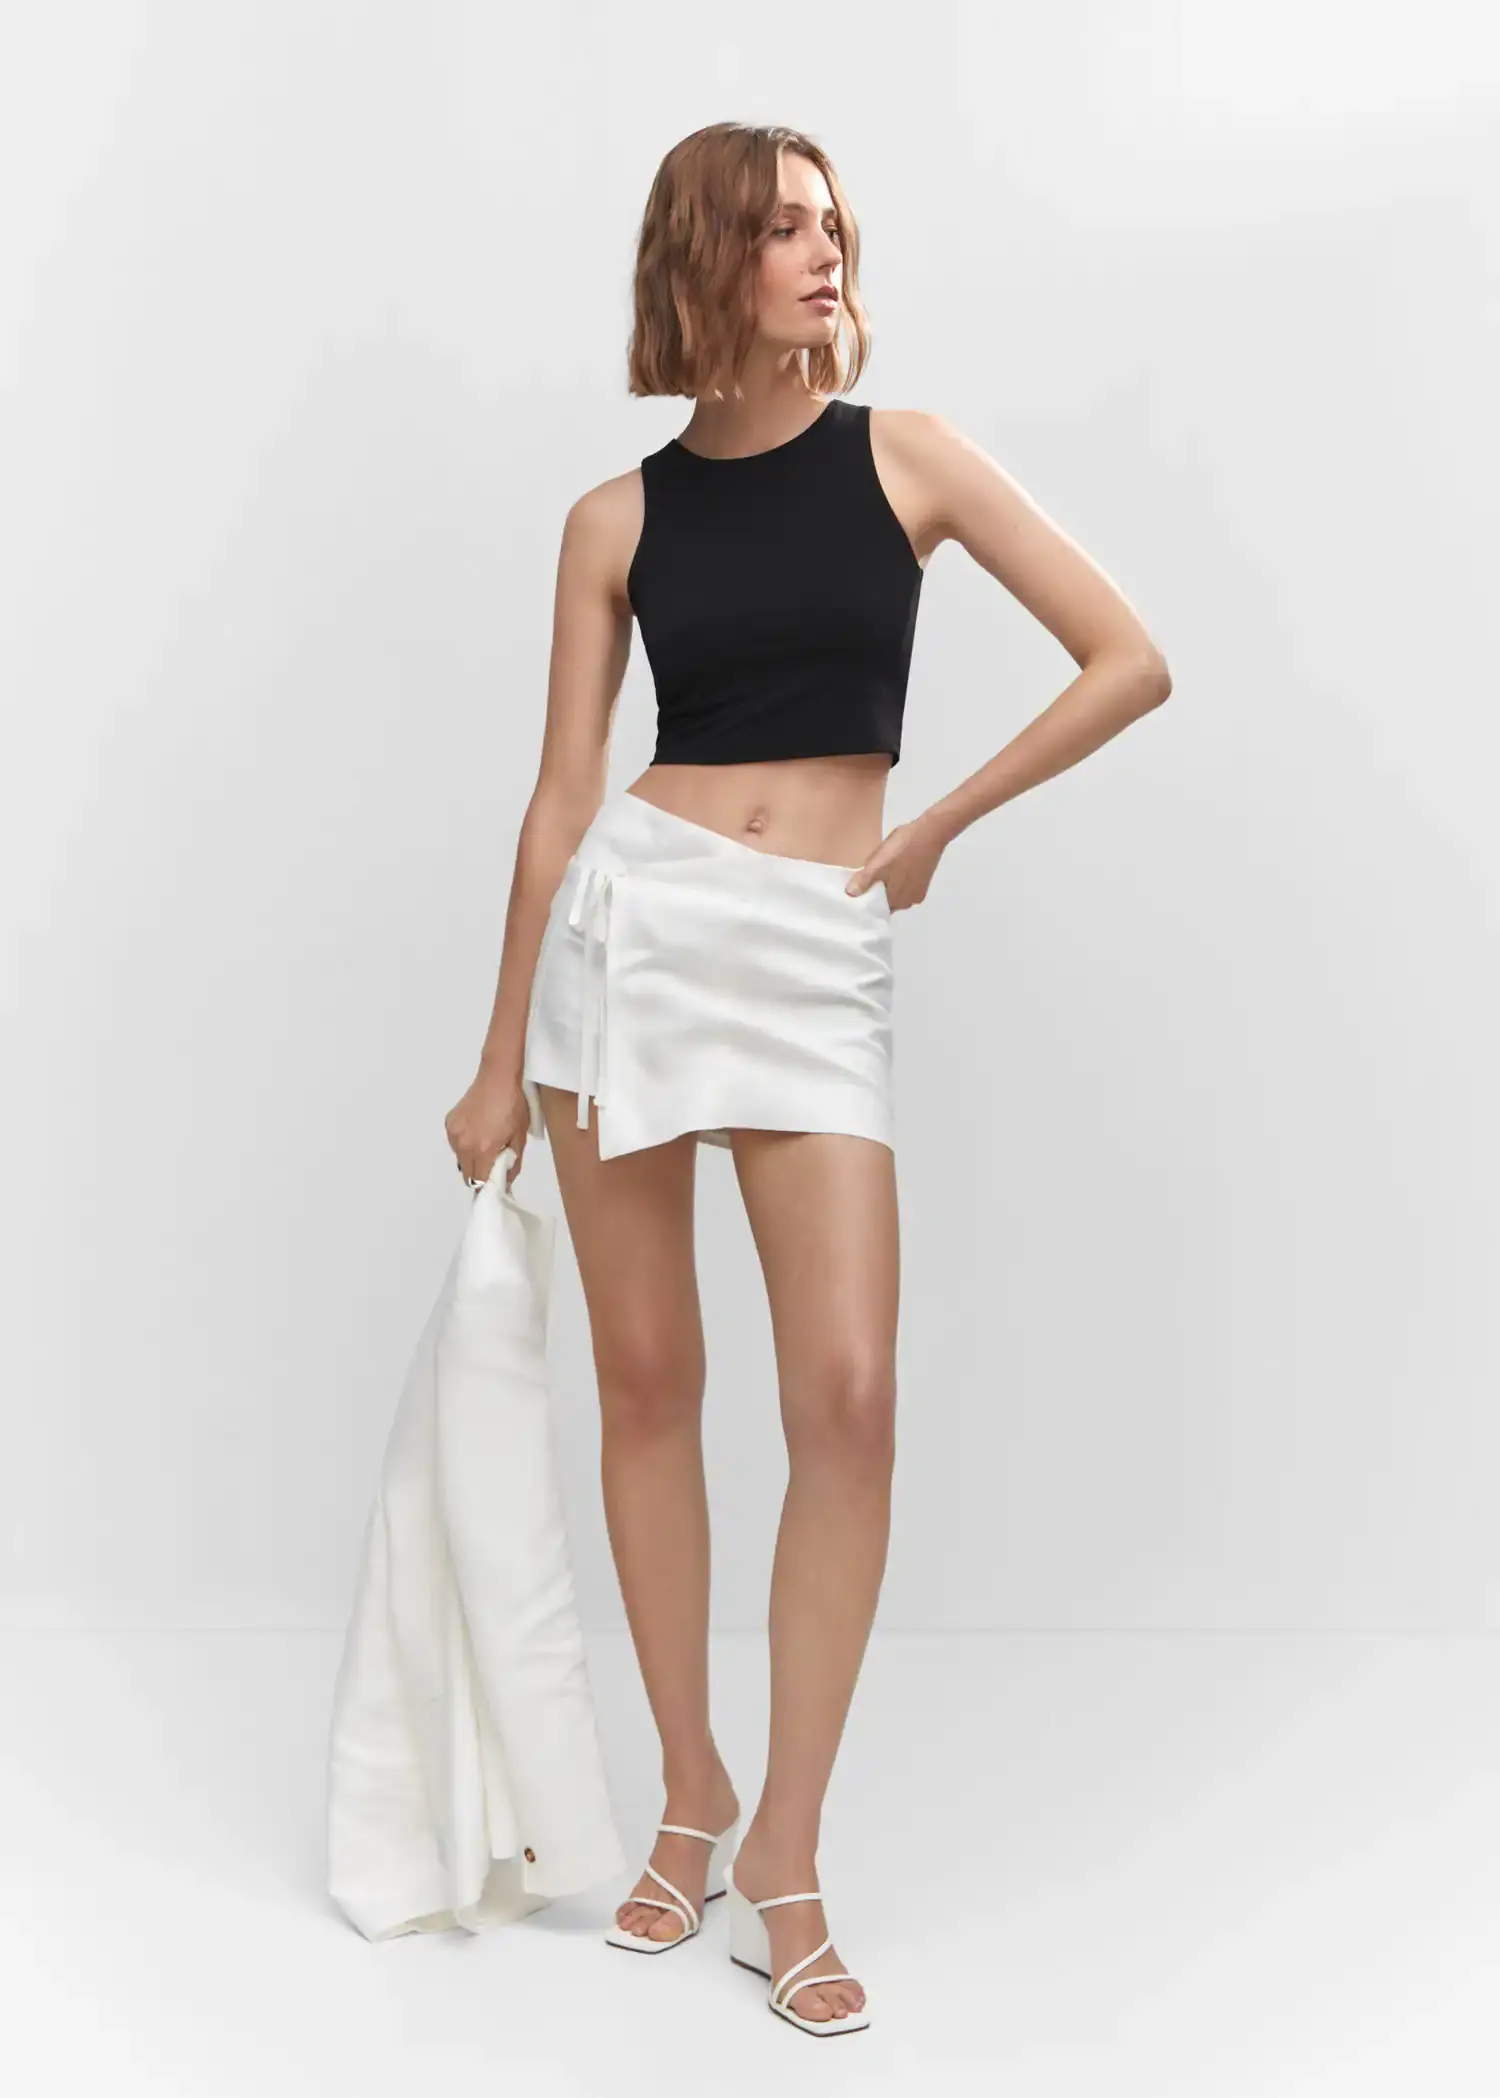 Mango Crop top halter neck. a woman wearing a black top and white skirt. 